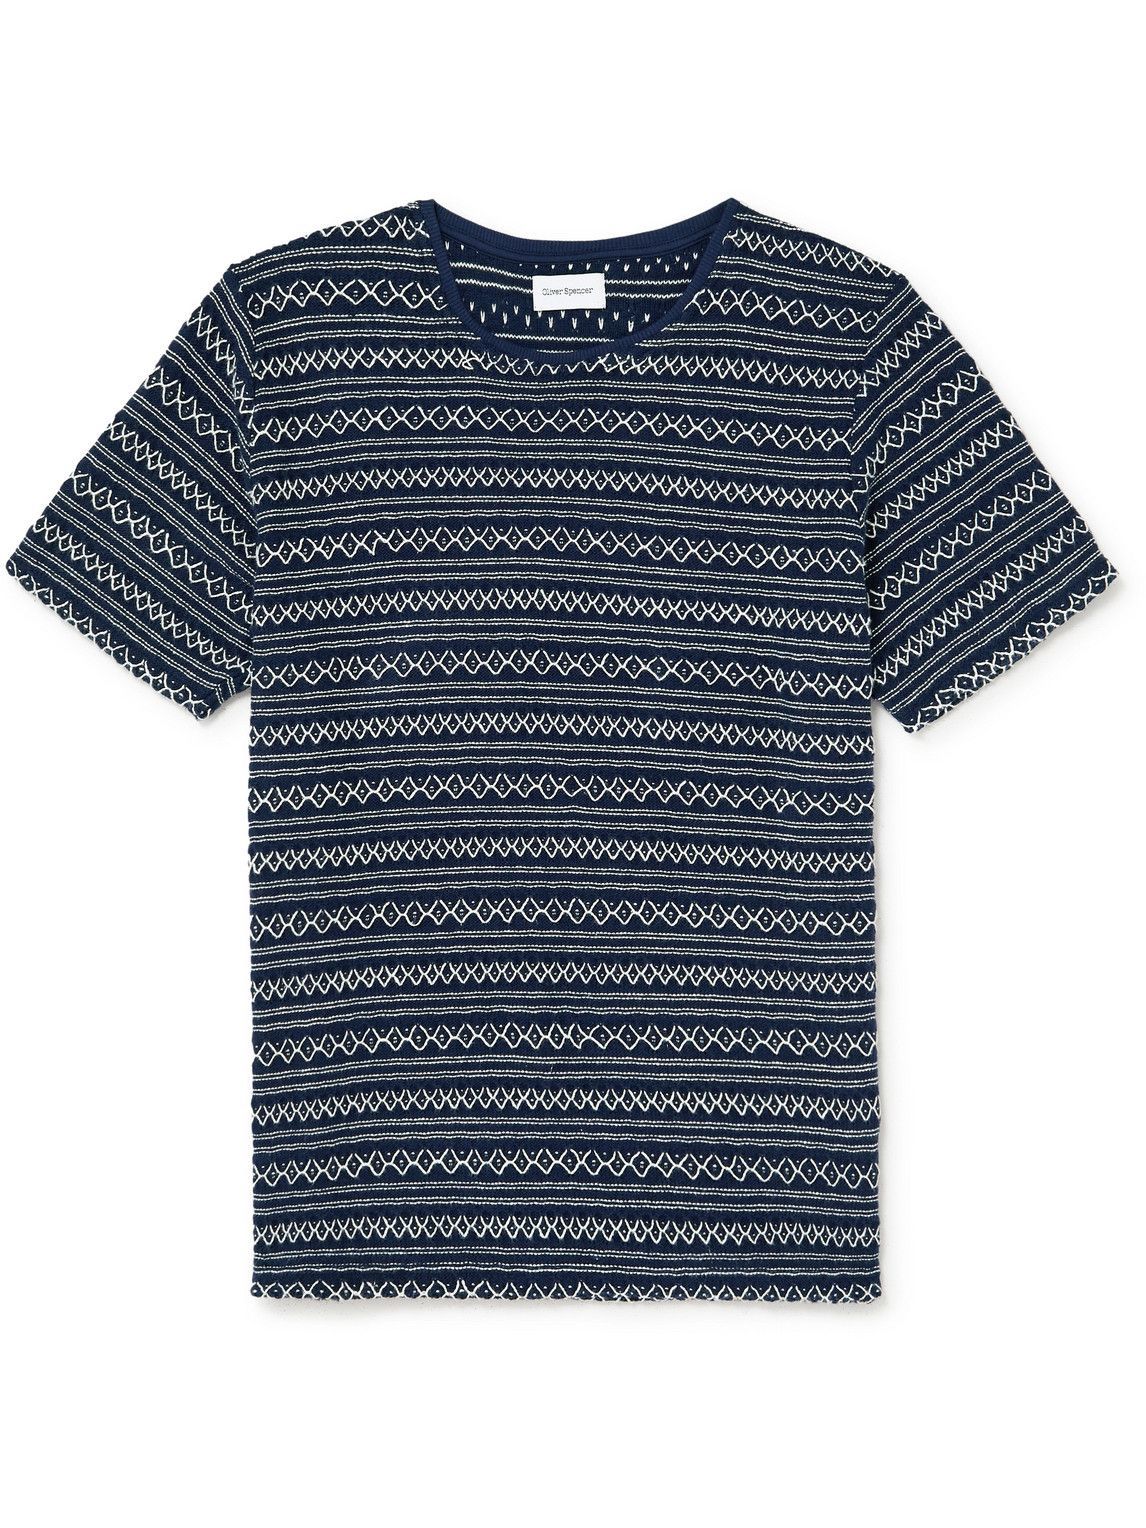 Oliver Spencer - Conduit Embroidered Crocheted Cotton T-Shirt - Blue